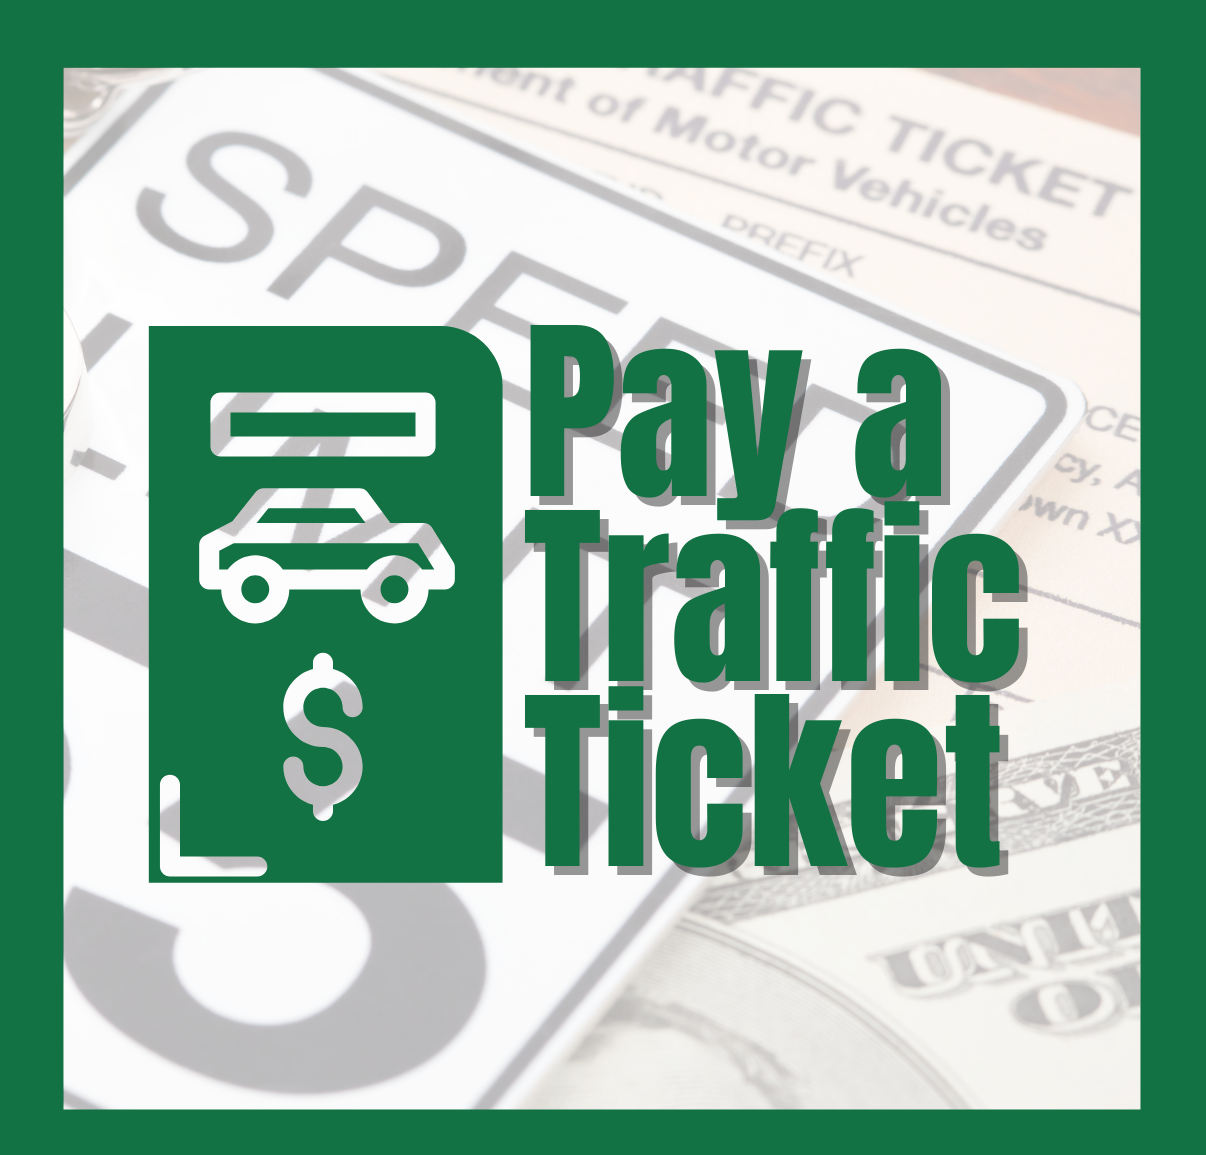 Pay Traffic Ticket